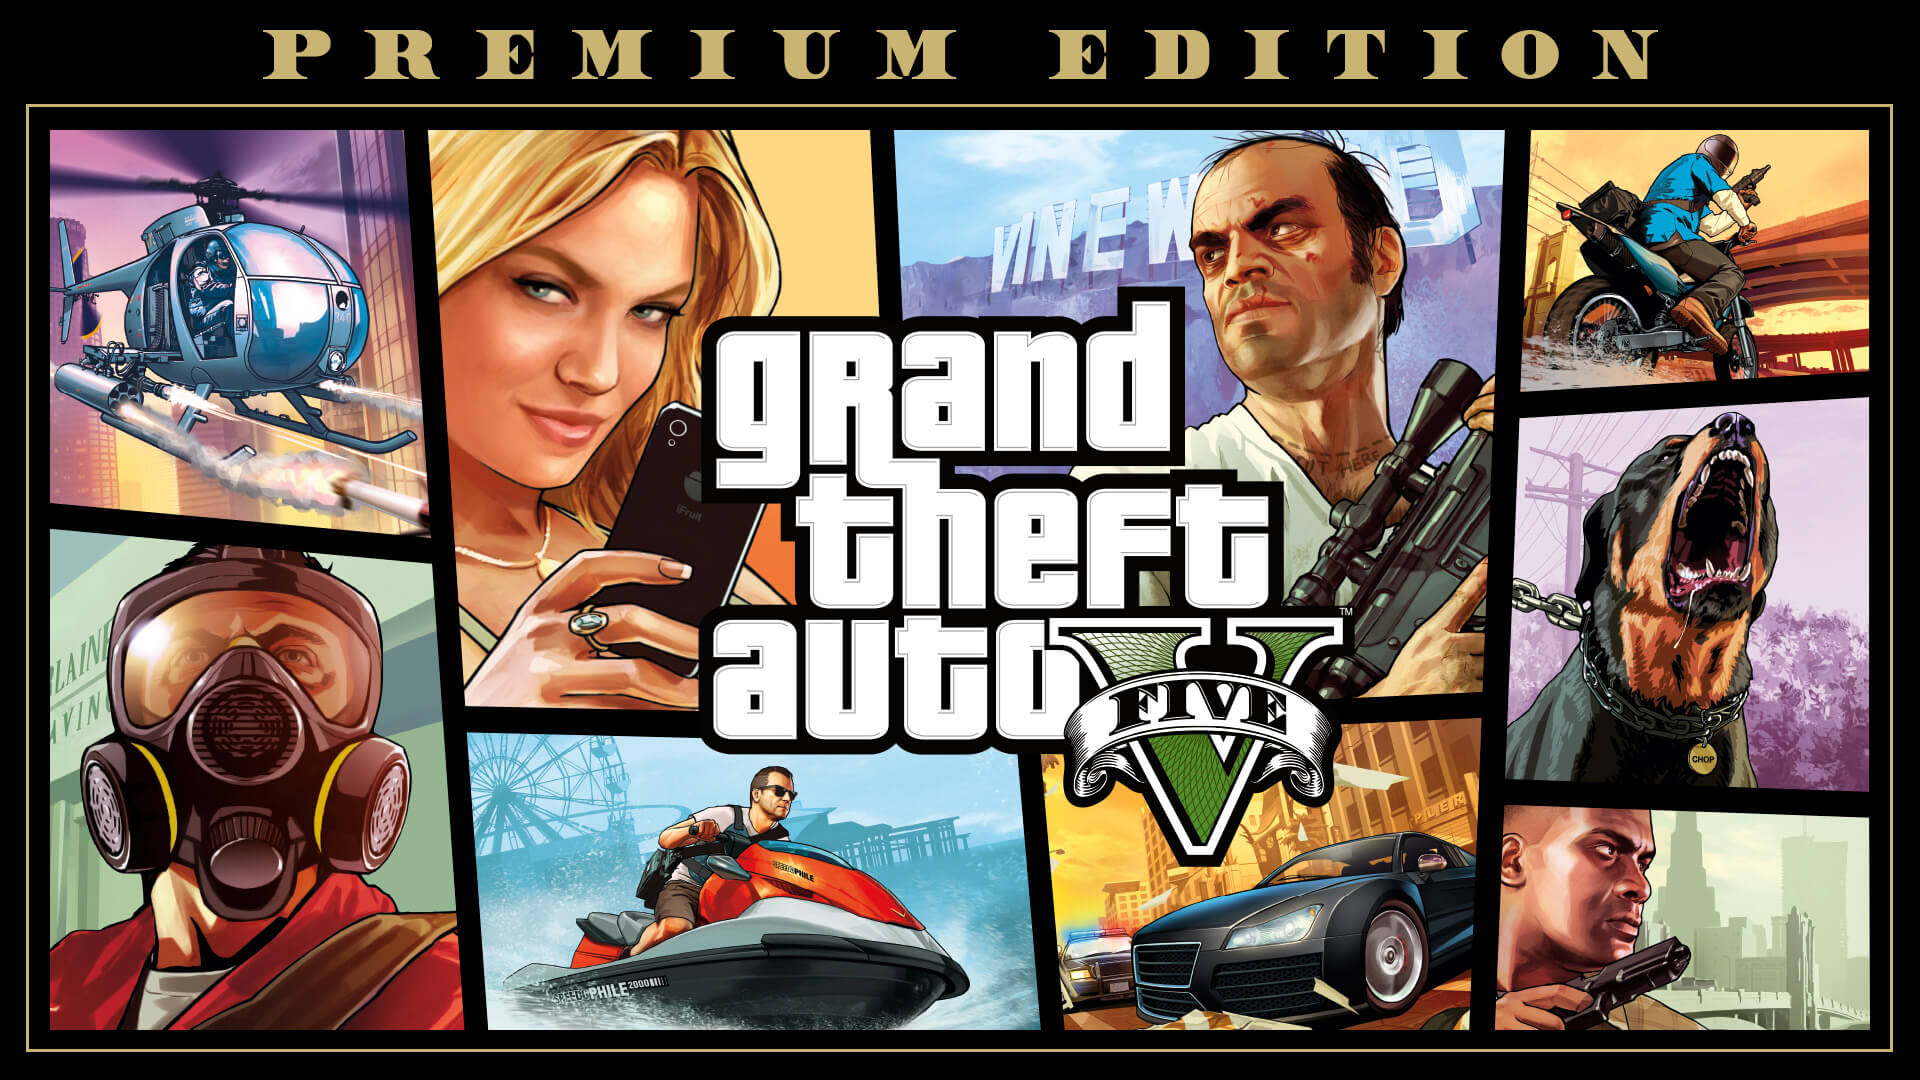 Grand Theft Auto V Premium Online Edition for Xbox One - Backordered $4.99